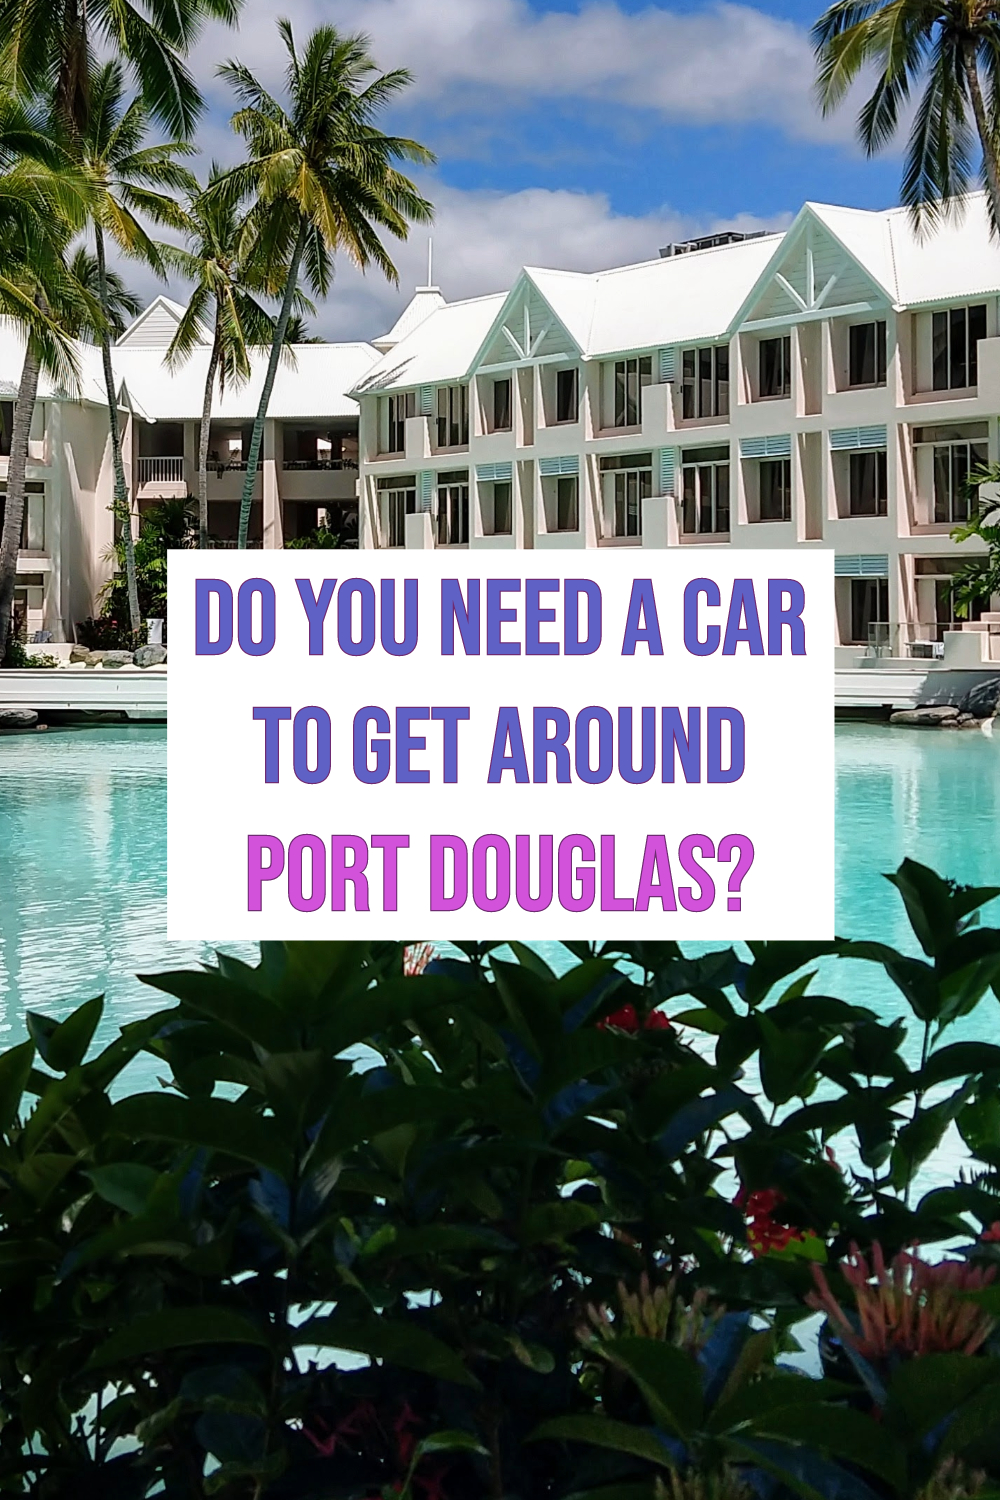 Is a car needed to get around Port Douglas